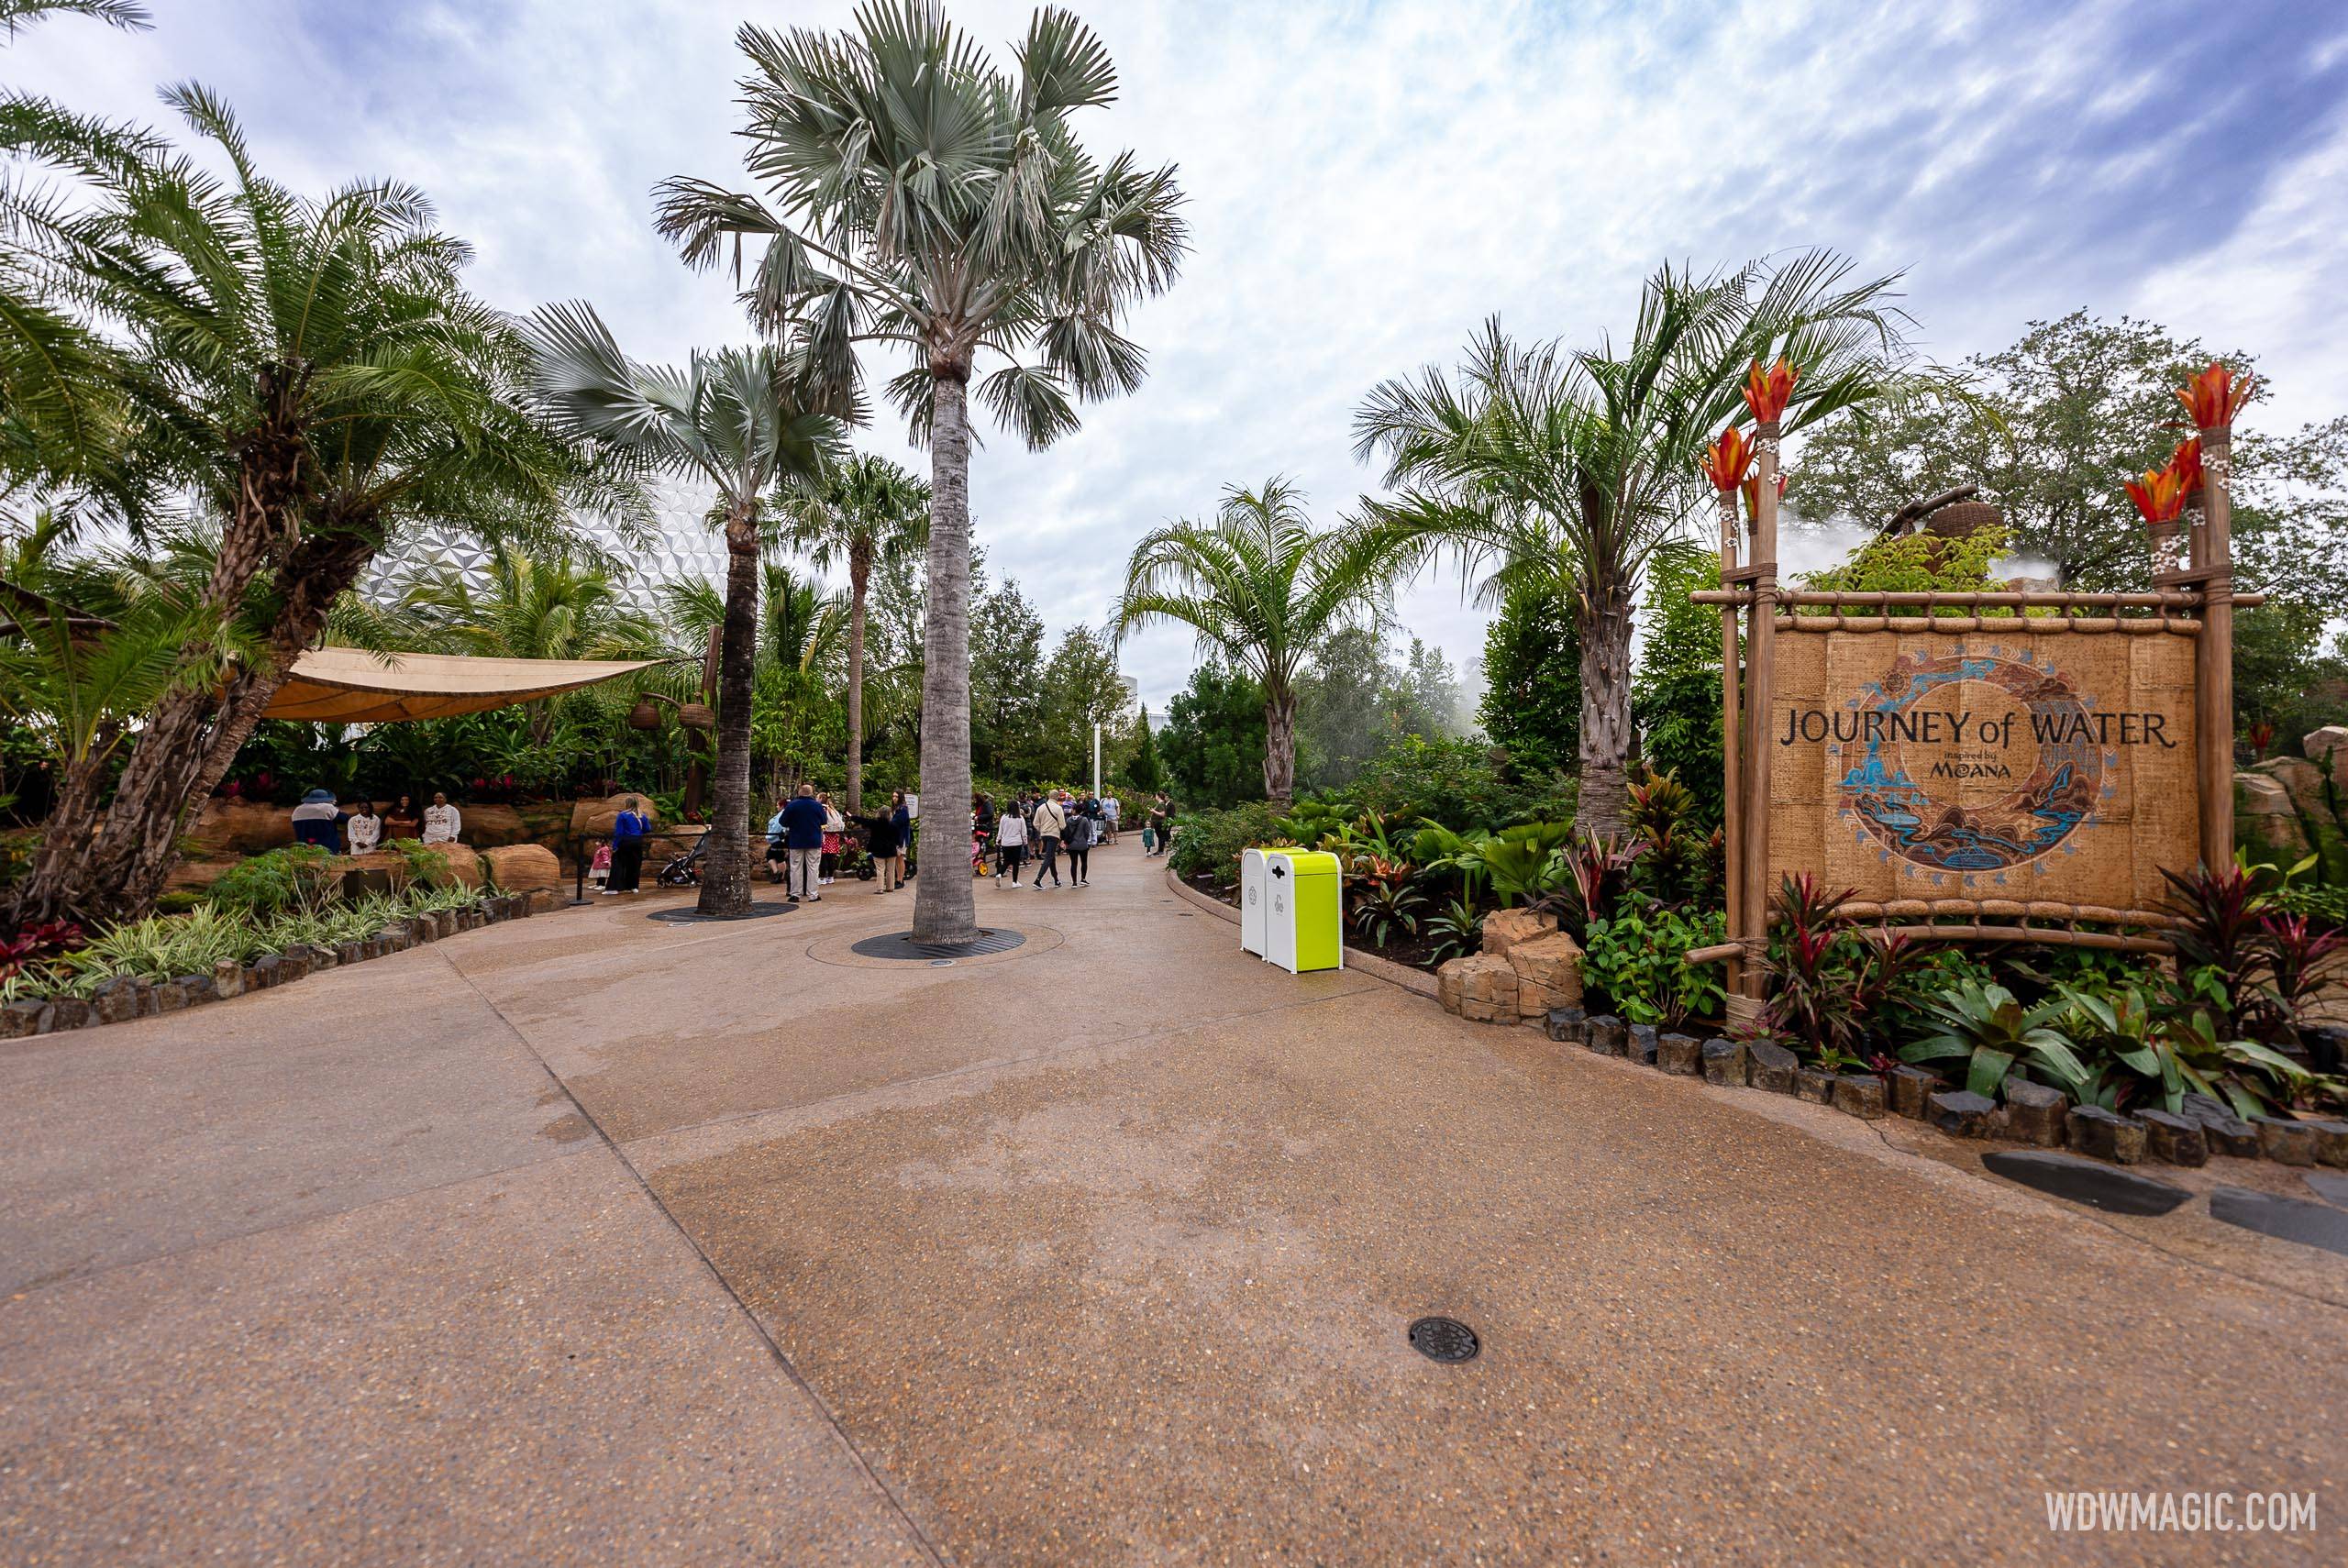 EPCOT's Journey of Water walkway reopens to guests following high-pressure leak